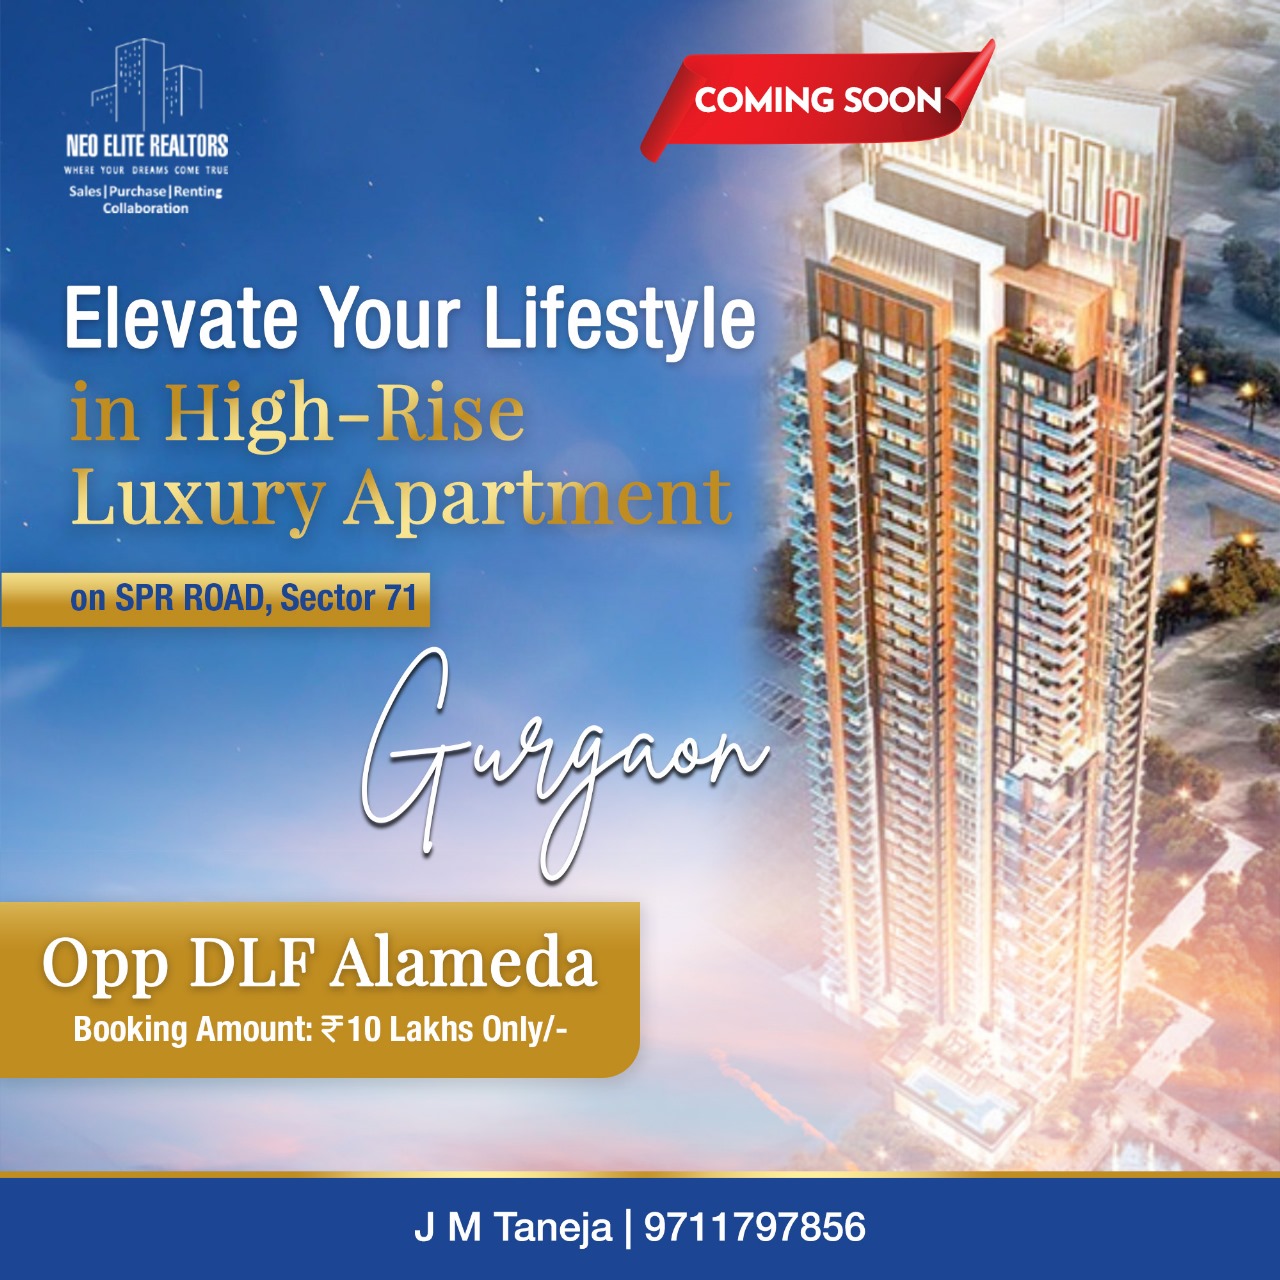 DLF Investment Opportunity